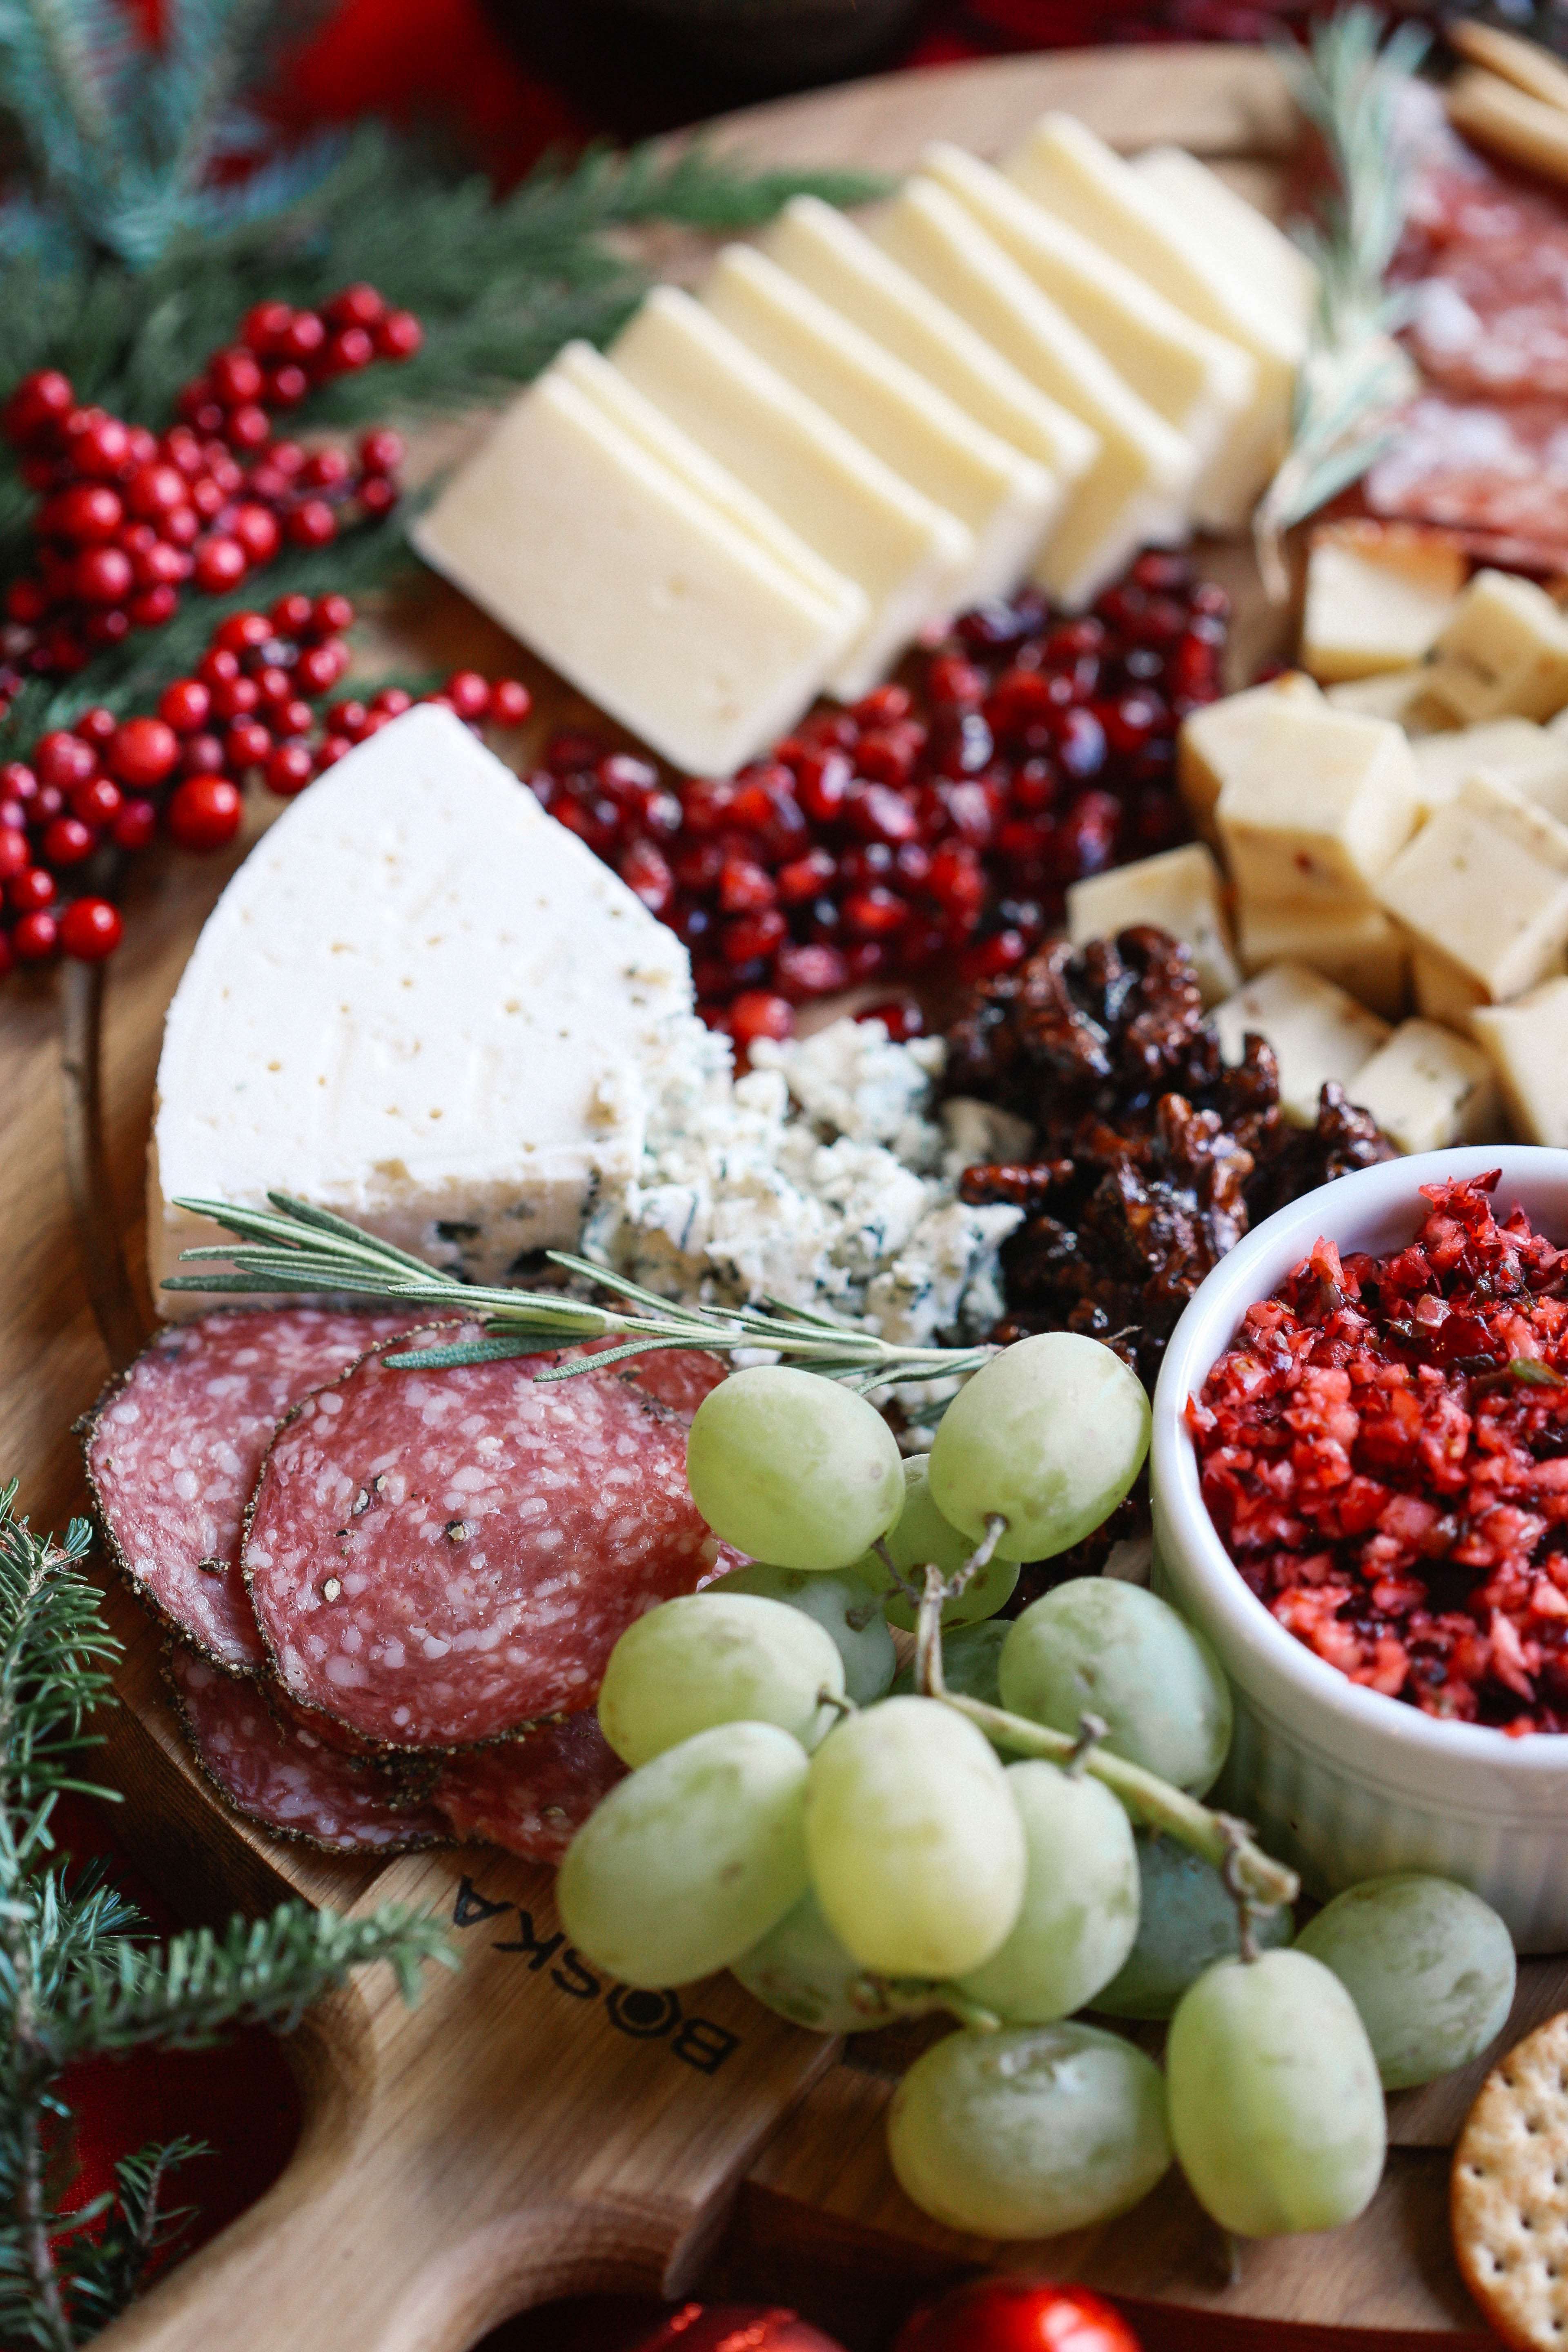 Learn how to create the perfect holiday cheese board in just five simple steps with an assortment of cheeses, meats, fruits, nuts, and a variety of spreads!